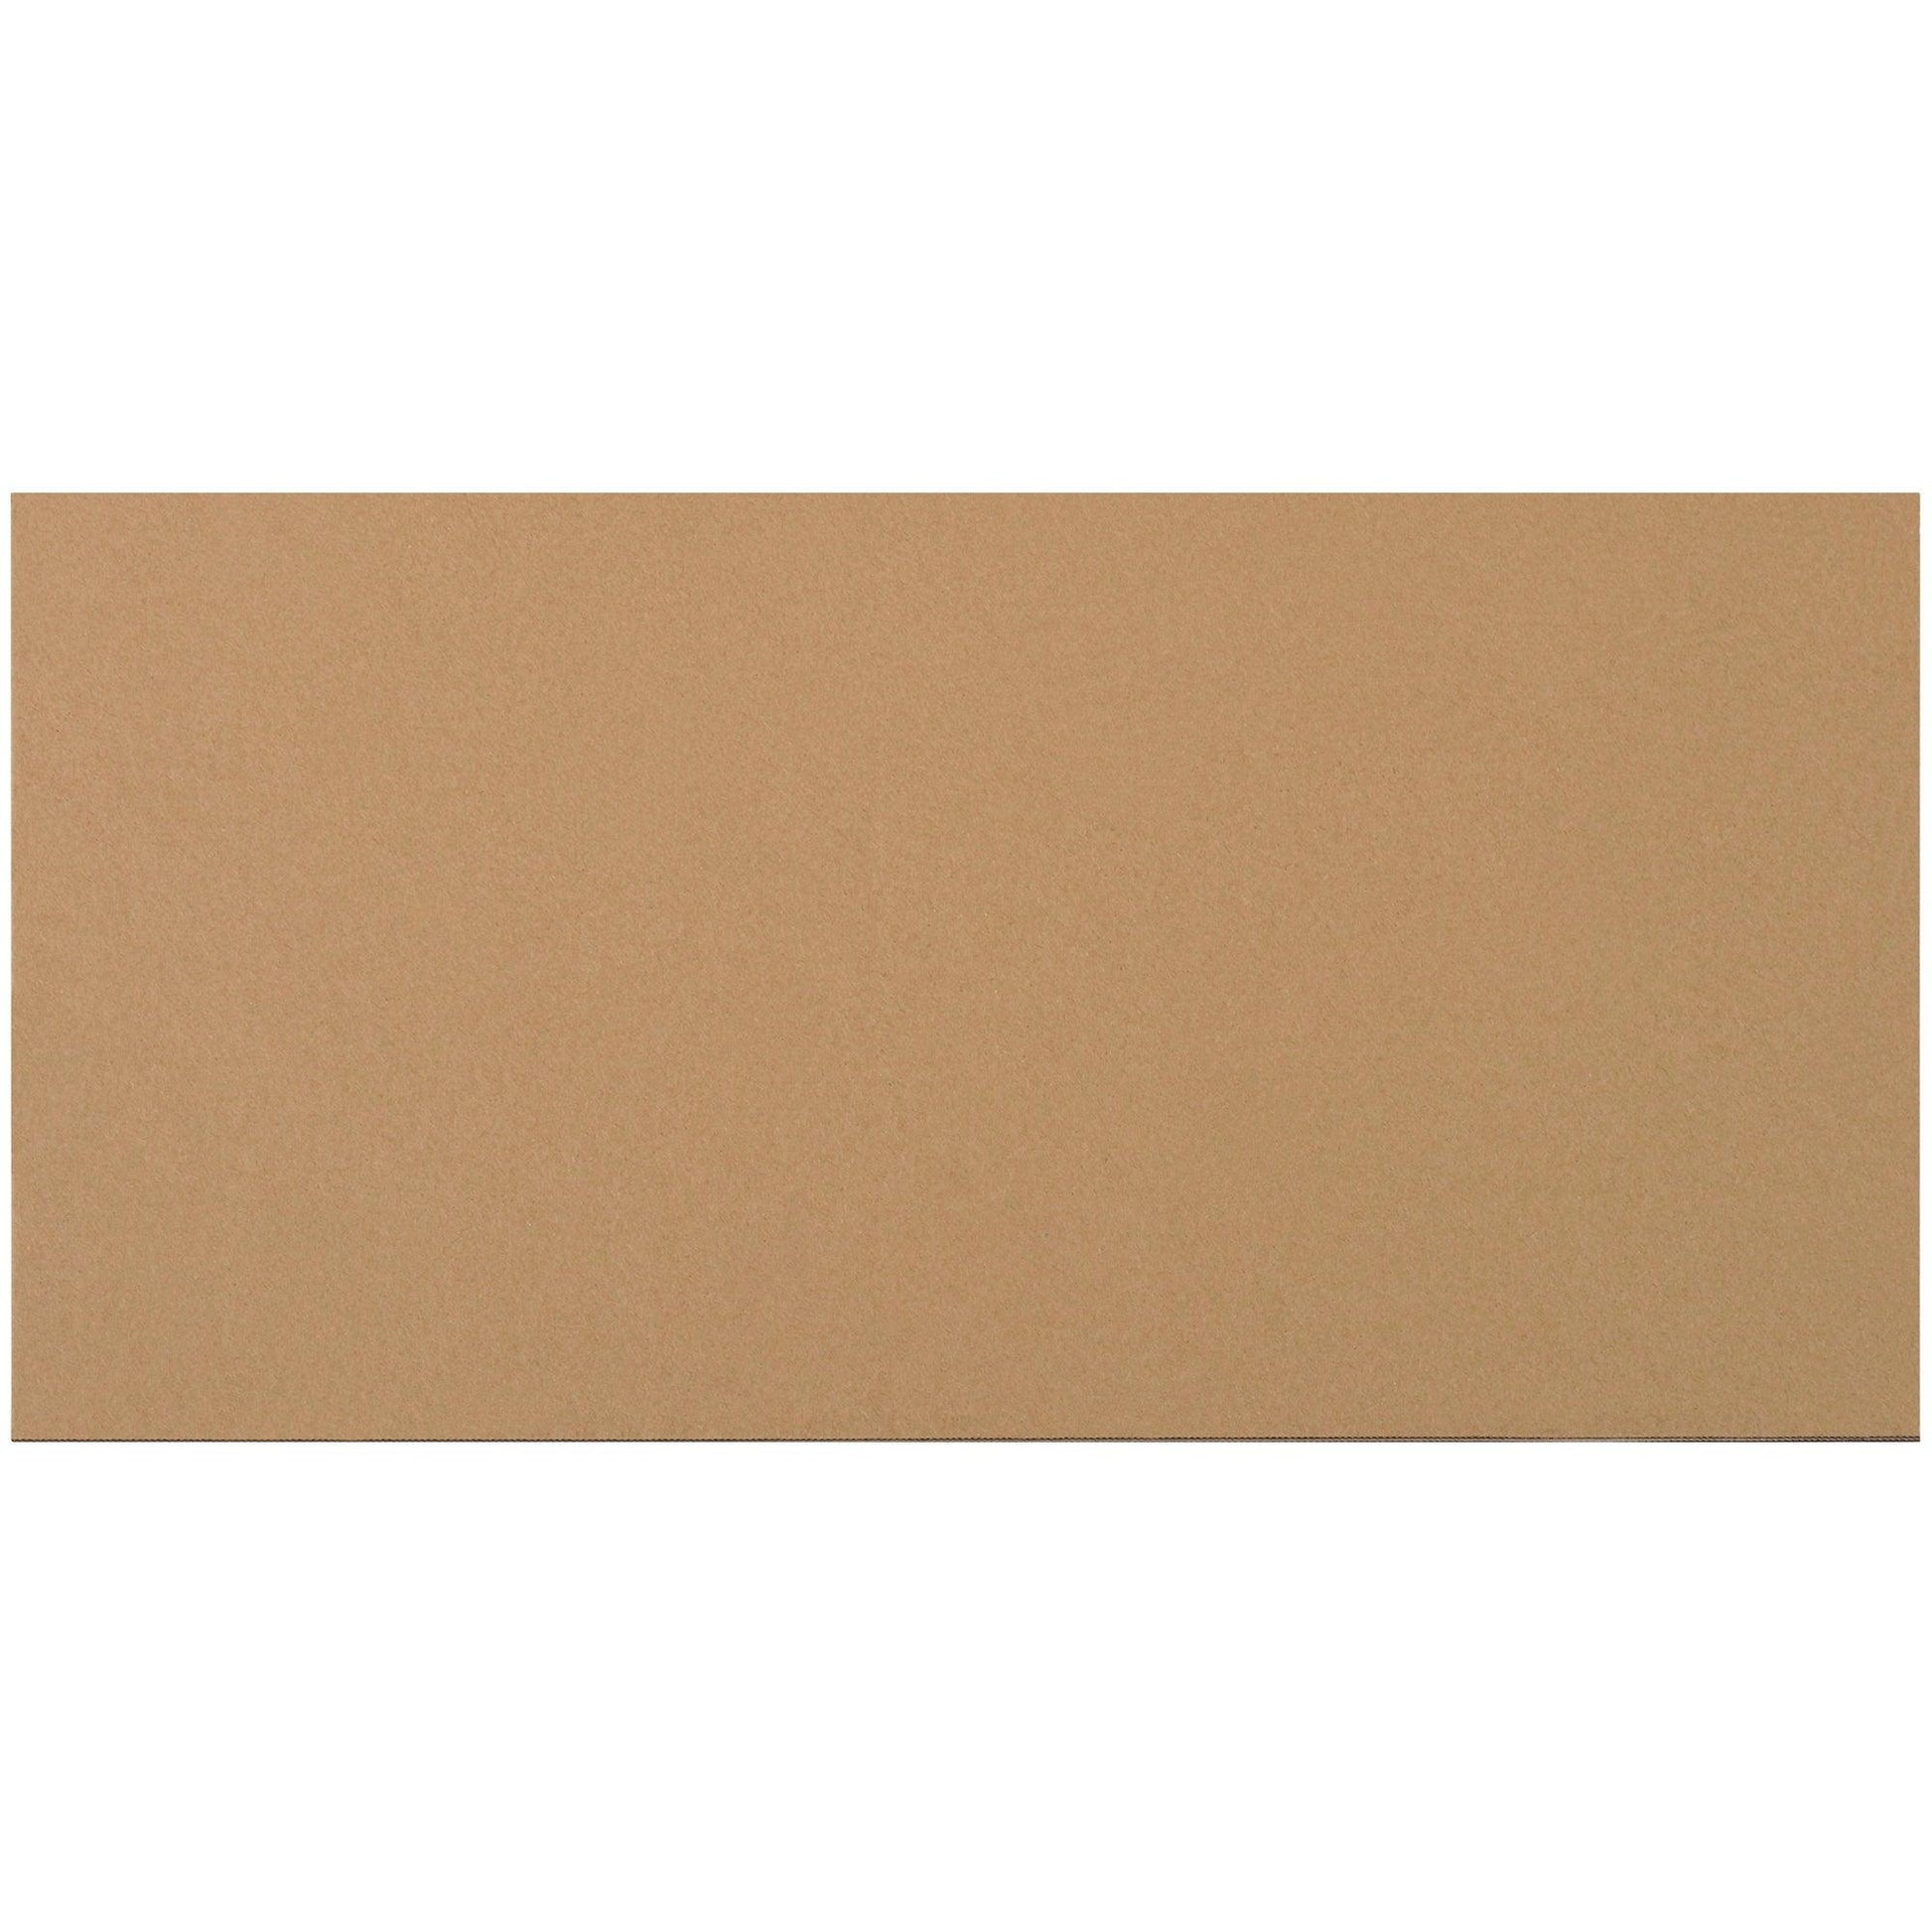 11 7/8 x 23 7/8" Corrugated Layer Pads - SP1123